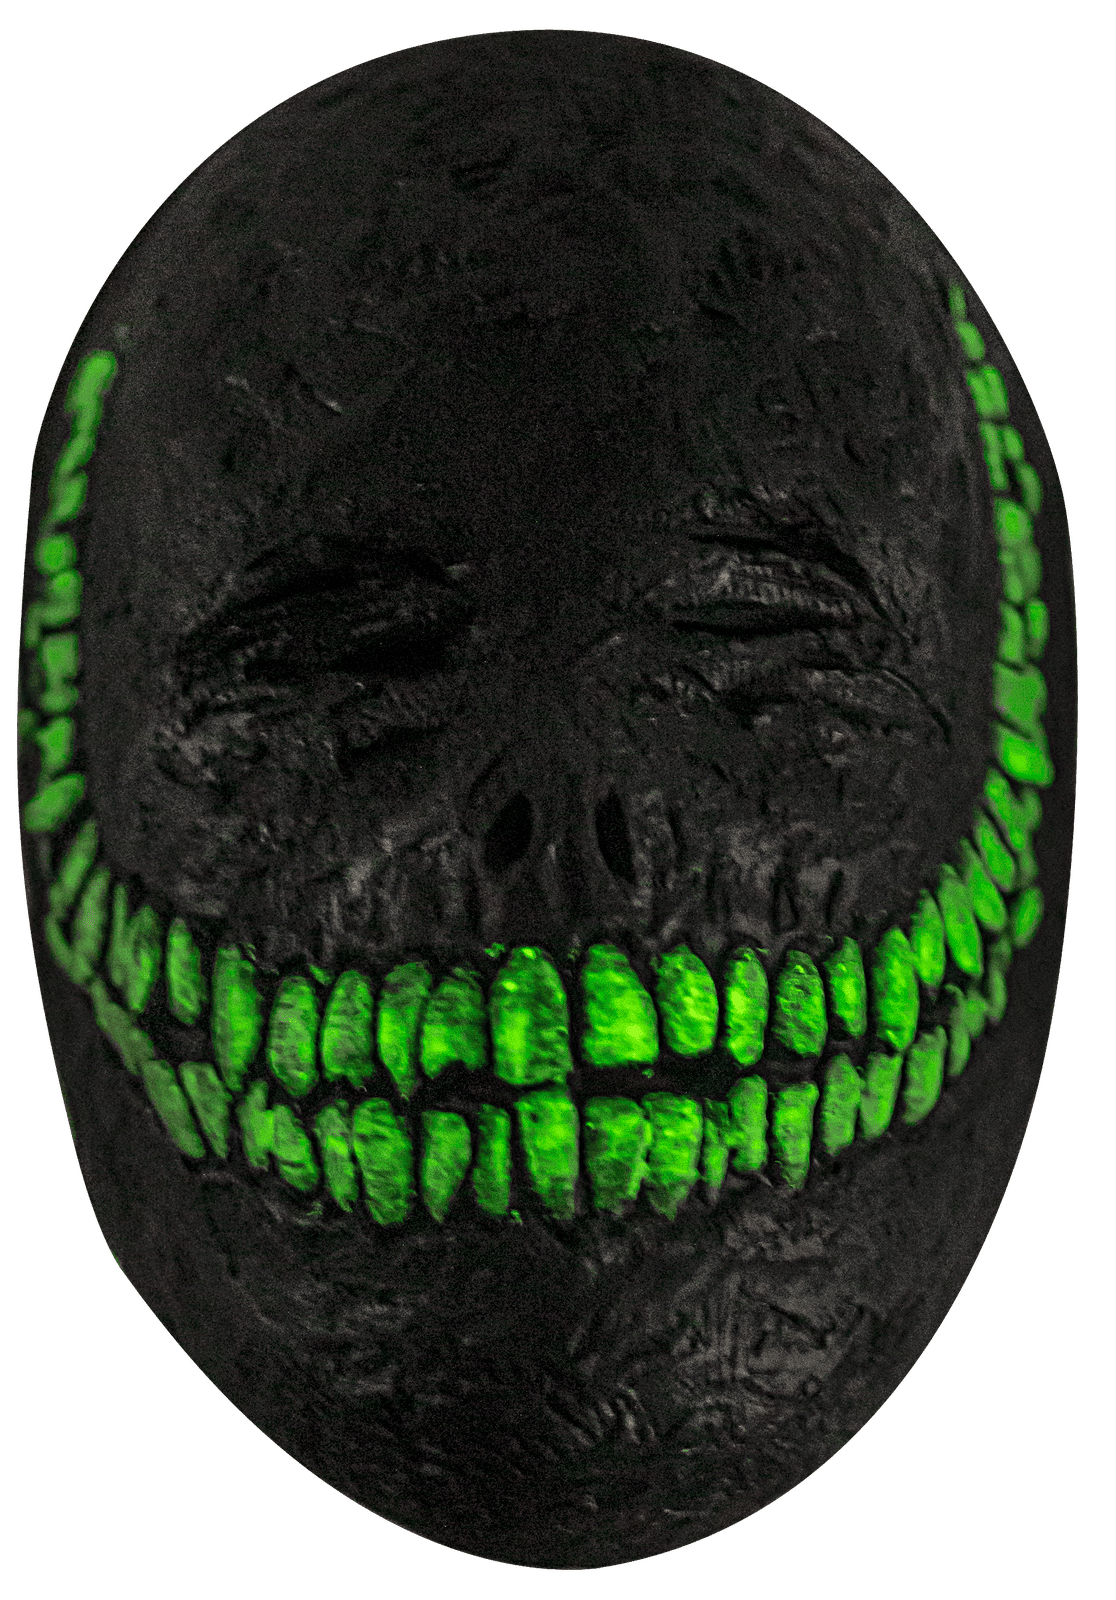 Creepy Grinning Glow in the Dark Mask 5